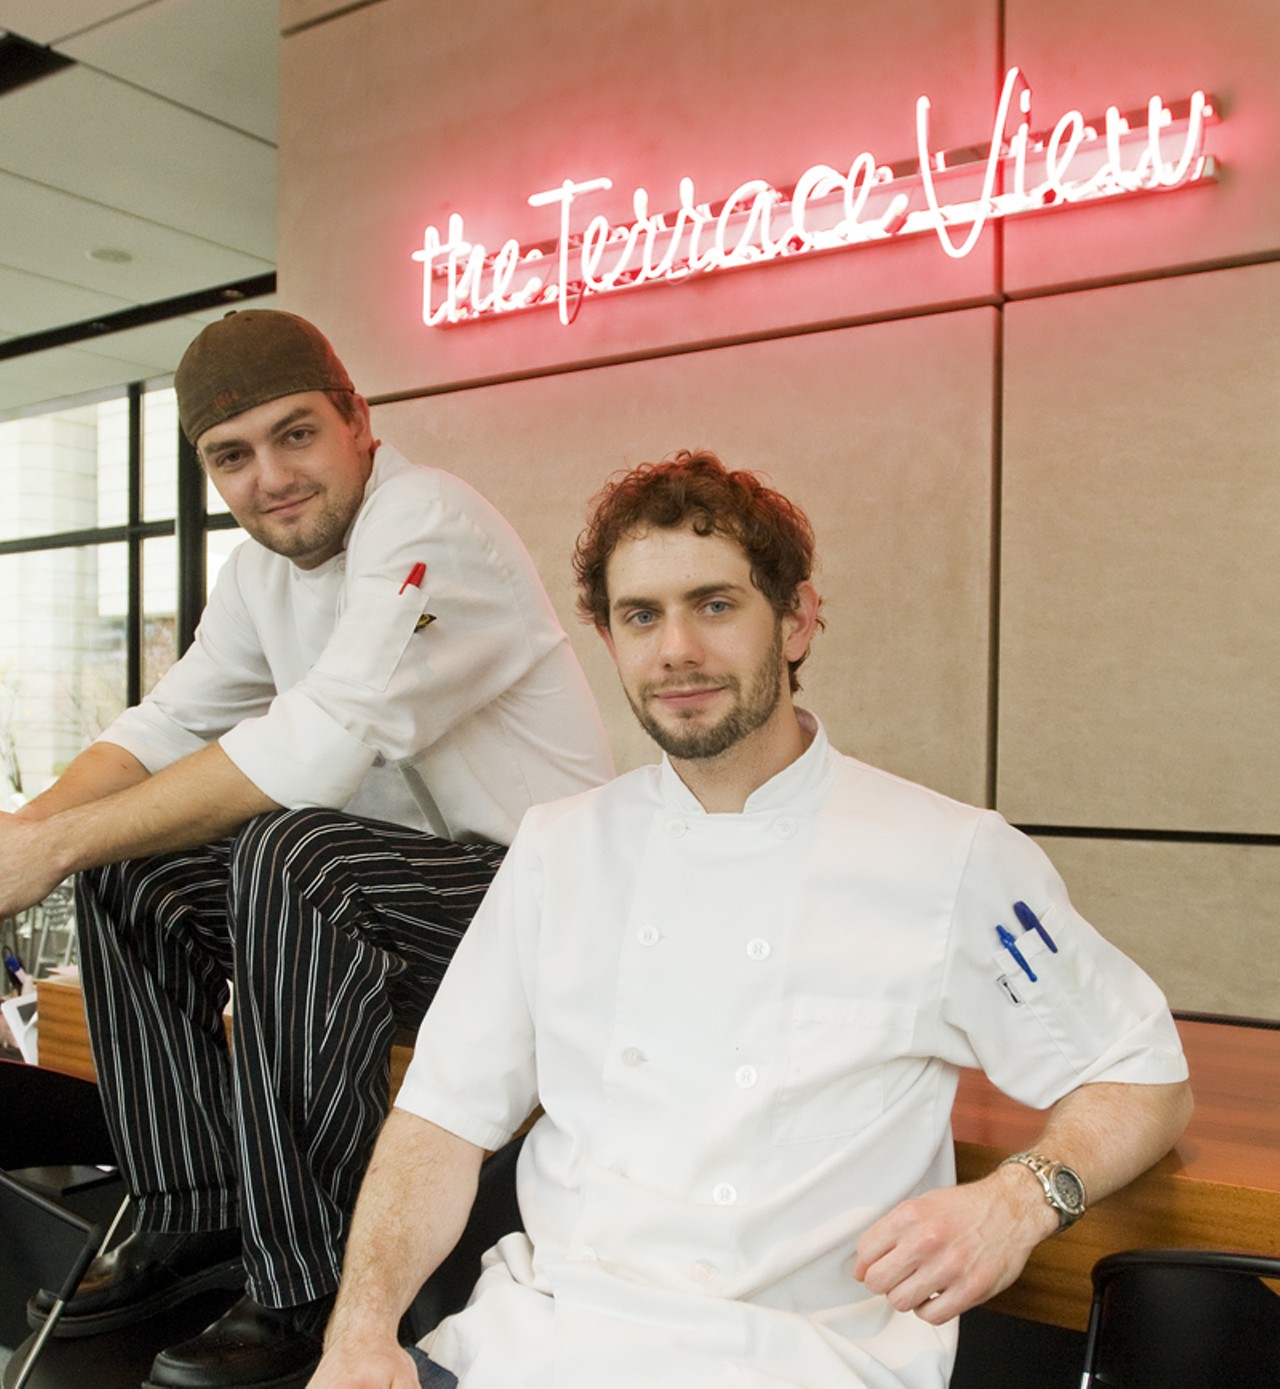 The two sous chefs at Terrace View are left-to-right, Nick Cox and Casey Kohler. Cox attended to L&rsquo;Ecole Culinaire to study the culinary arts, while Casey studied at St. Louis Community College at Forest Park. And, for all those interested... astrologically, they&rsquo;re both under the sign of Aquarius.